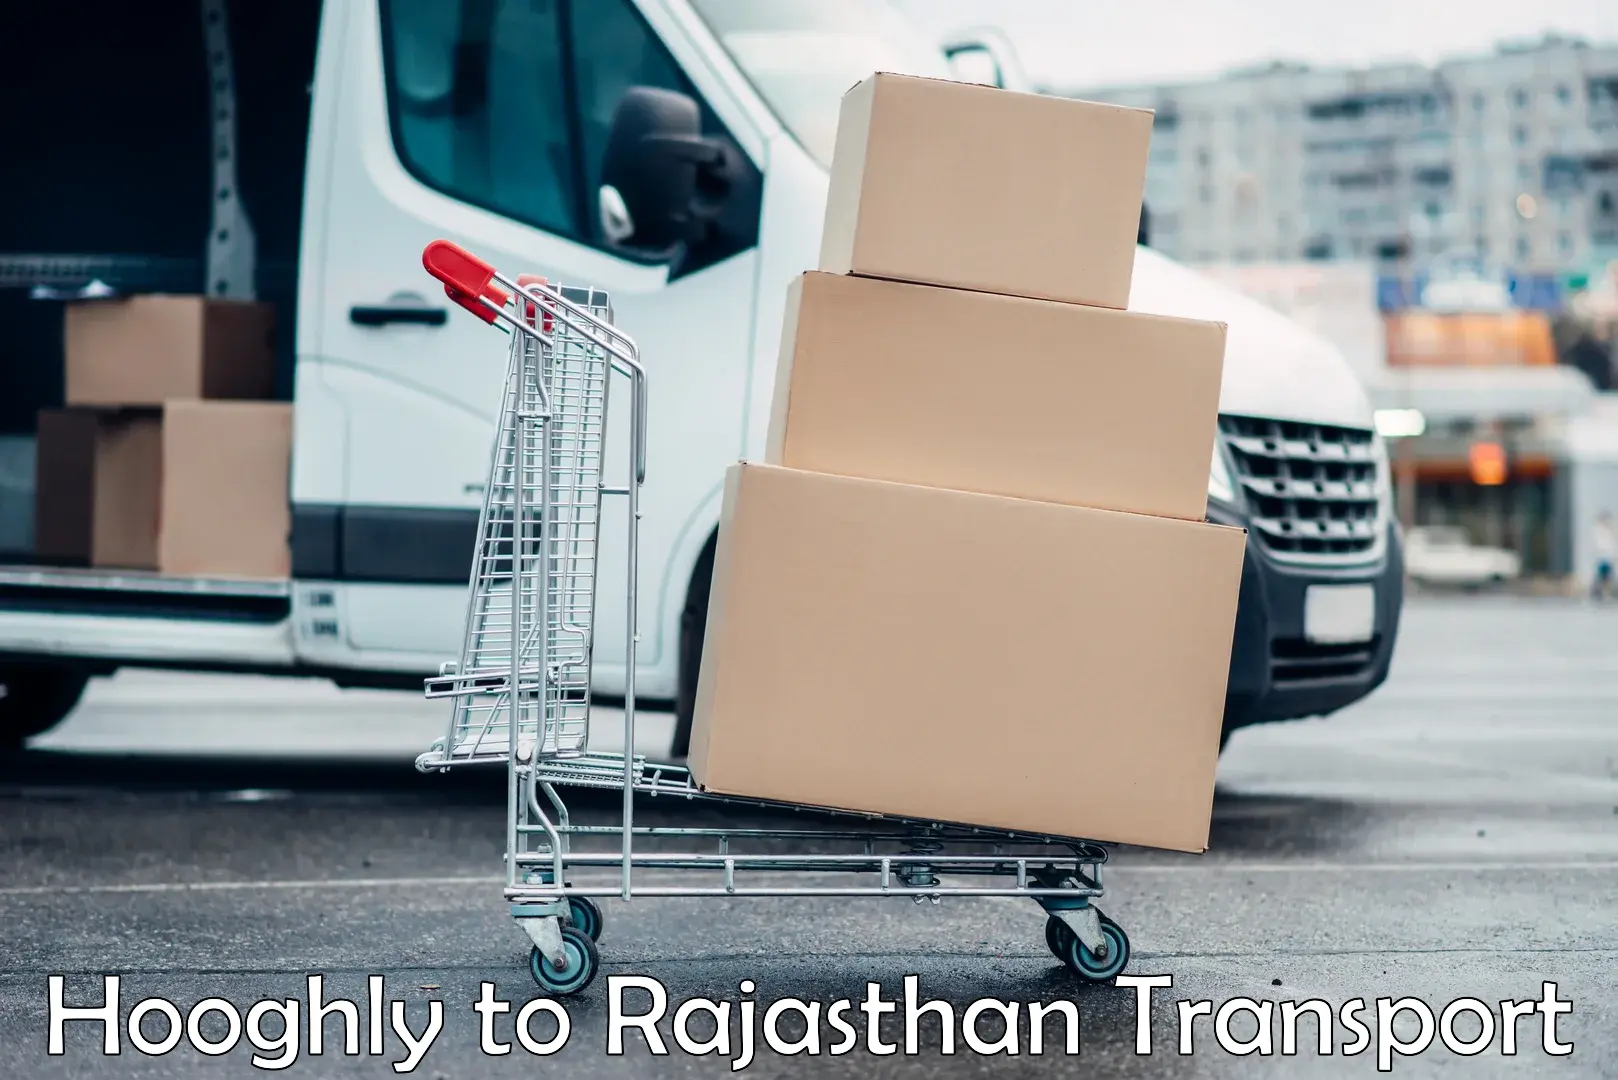 Vehicle parcel service Hooghly to Srimadhopur